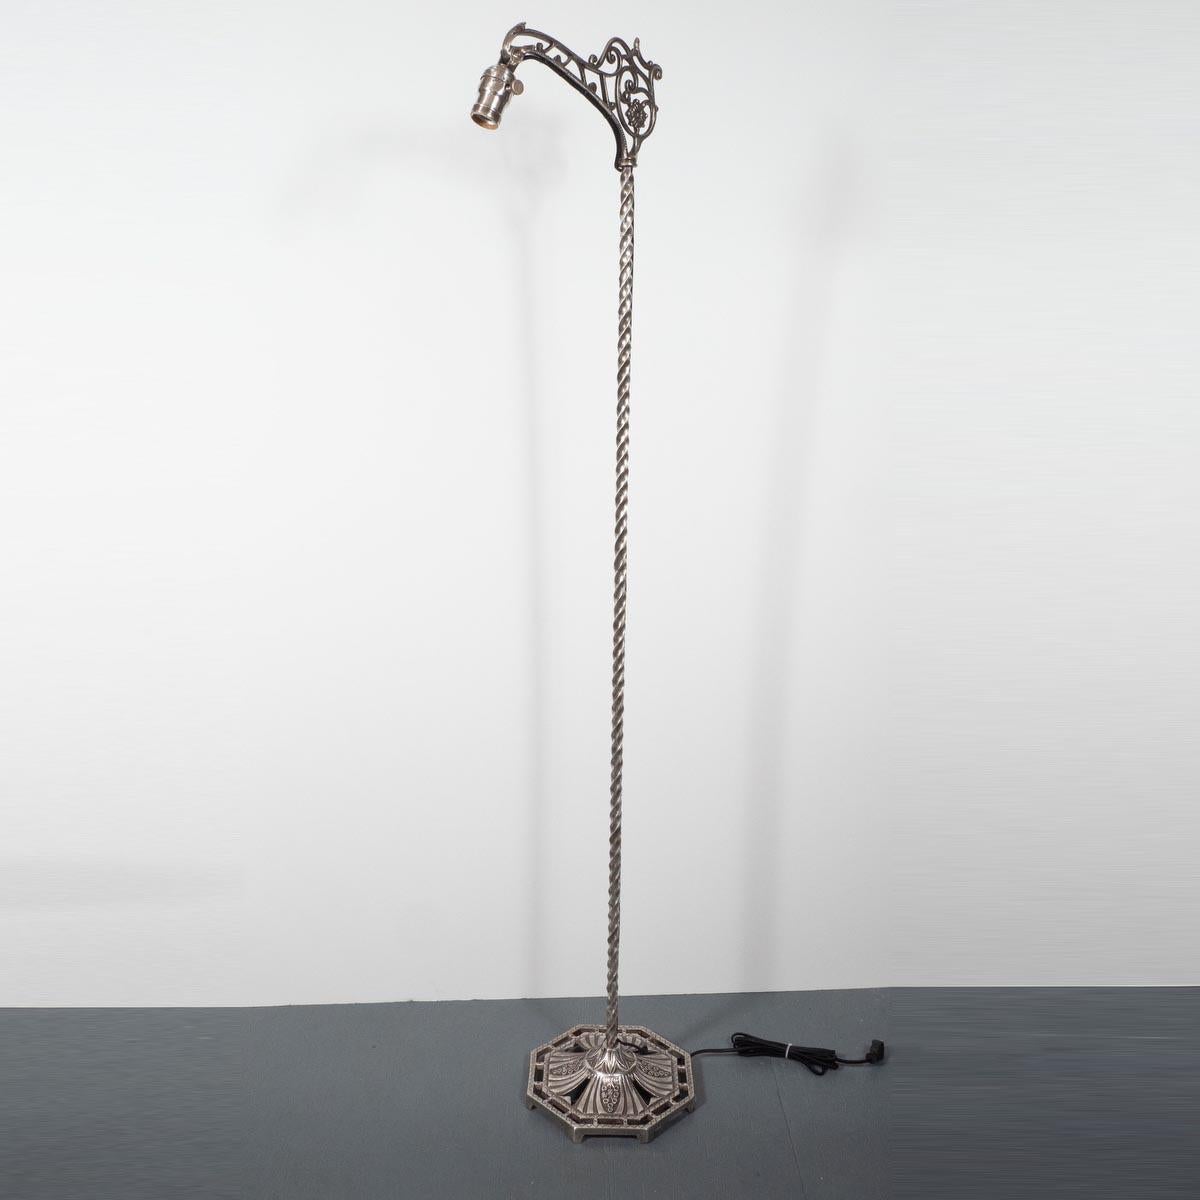 Wrought iron, plated finish, Art Nouveau style floor lamp with foliate and tendril motif.